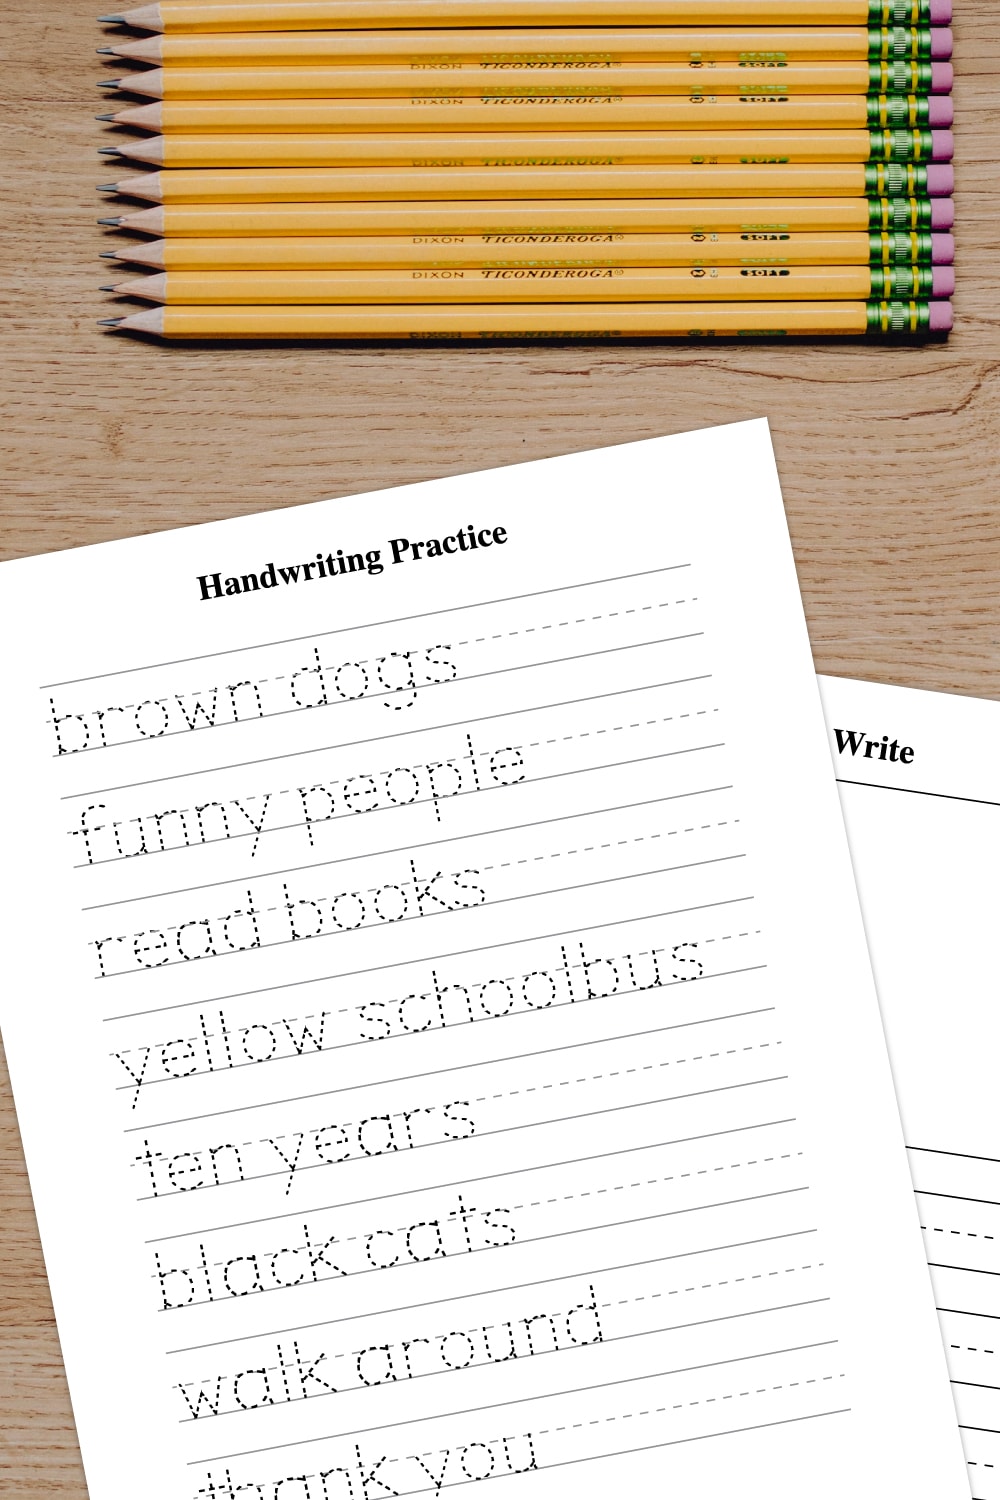 Wooden background with top view of yellow pencils stacked and preview of handwriting practice worksheets on the bottom. 